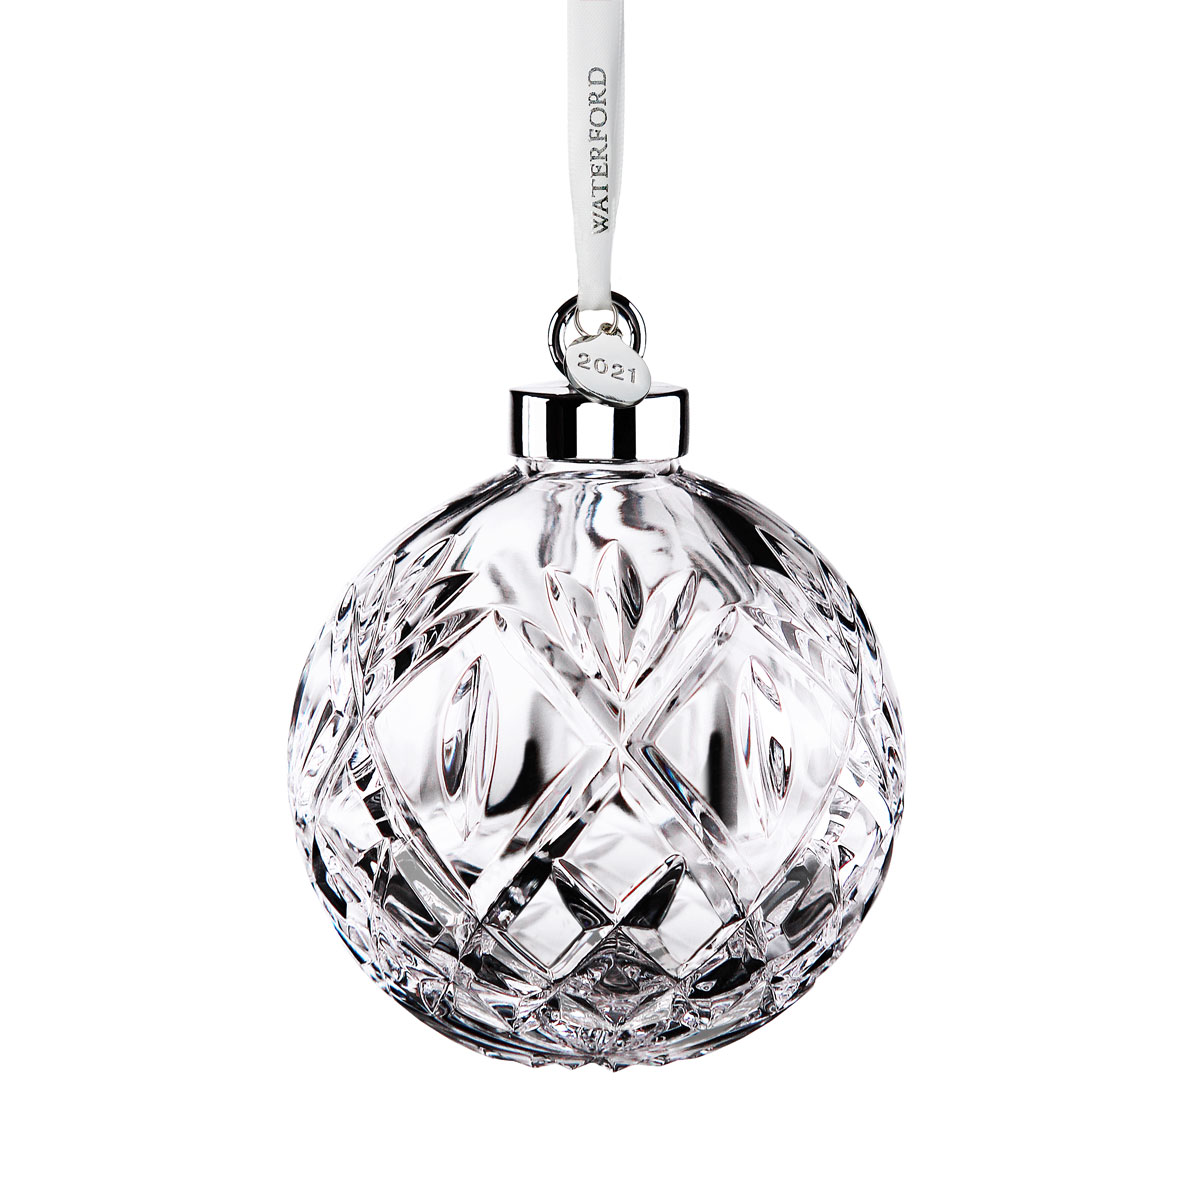 Waterford Crystal 2021 Huntley Ball Dated Ornament, Limited Edition